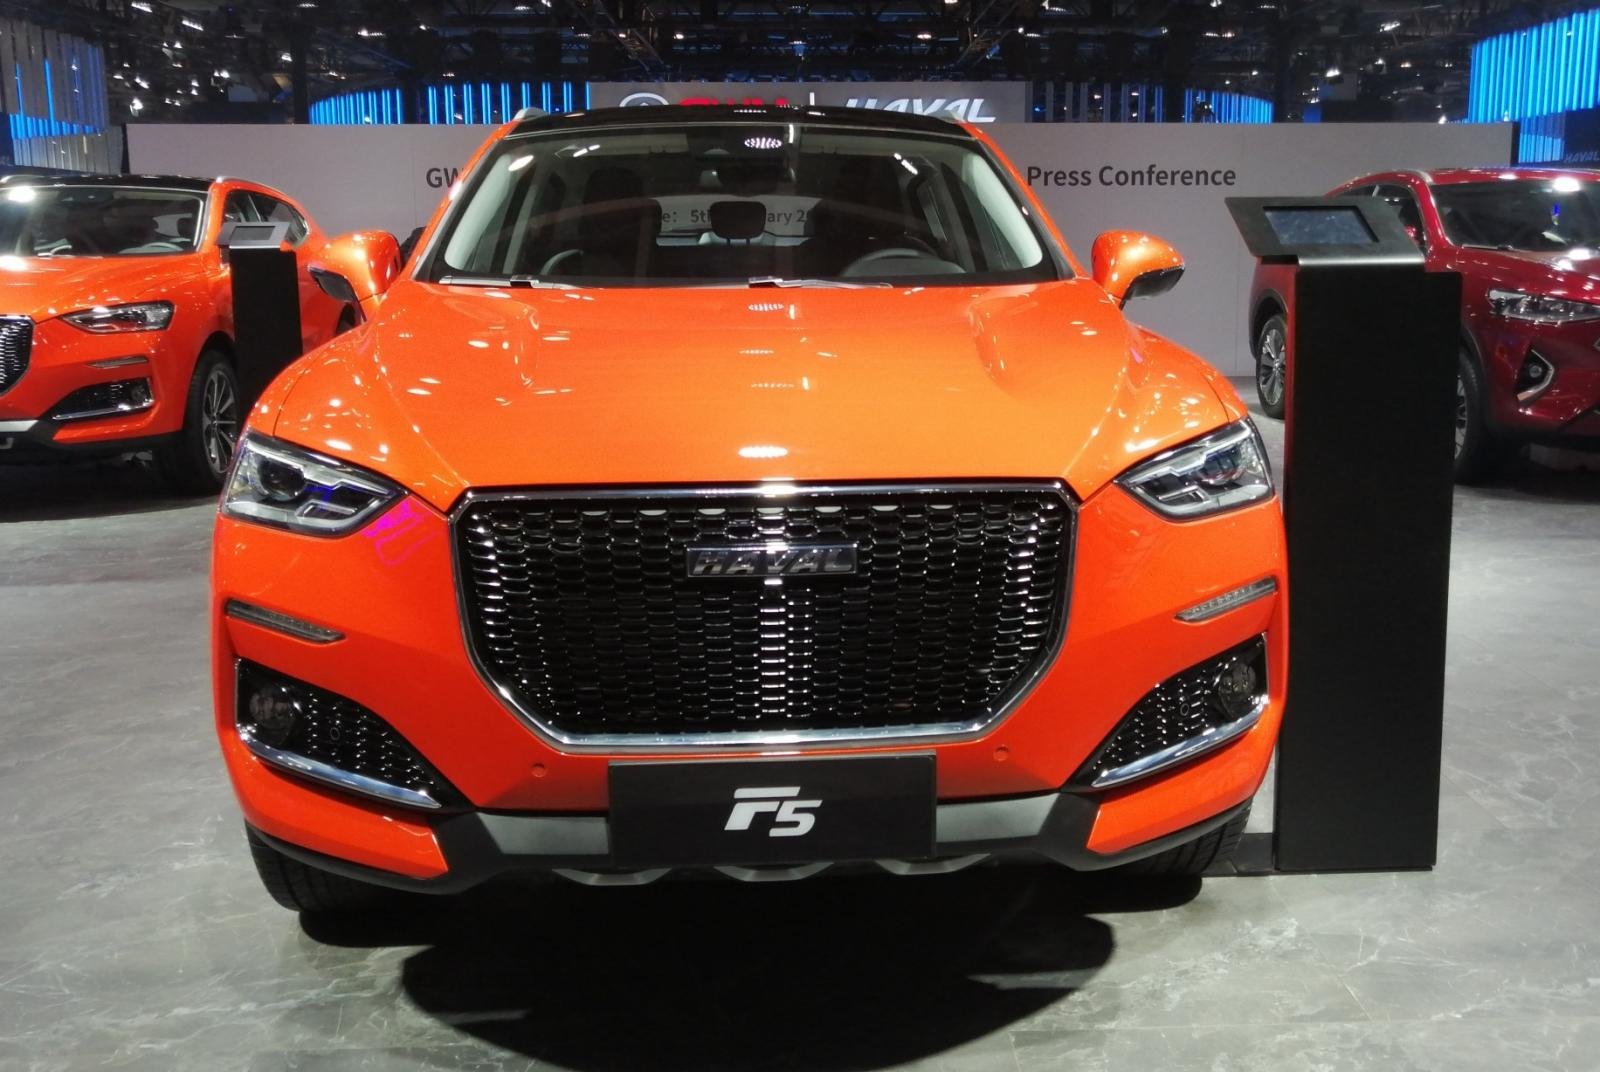 Haval F5 at Auto Expo 2020